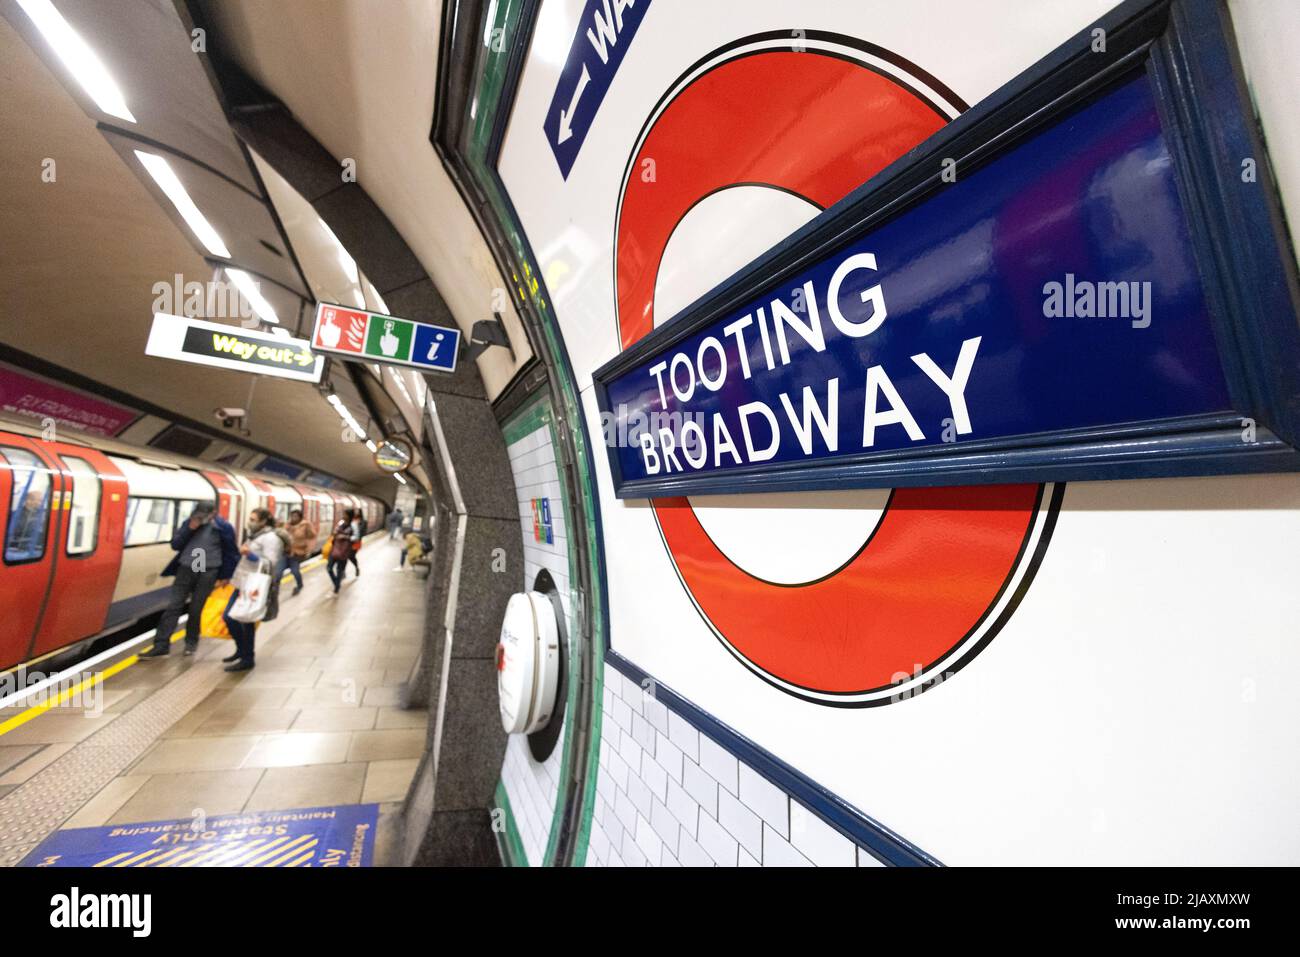 Tooting Broadway underground station interior, platform and roundel sign,  London tube stations, Tooting, London UK Stock Photo